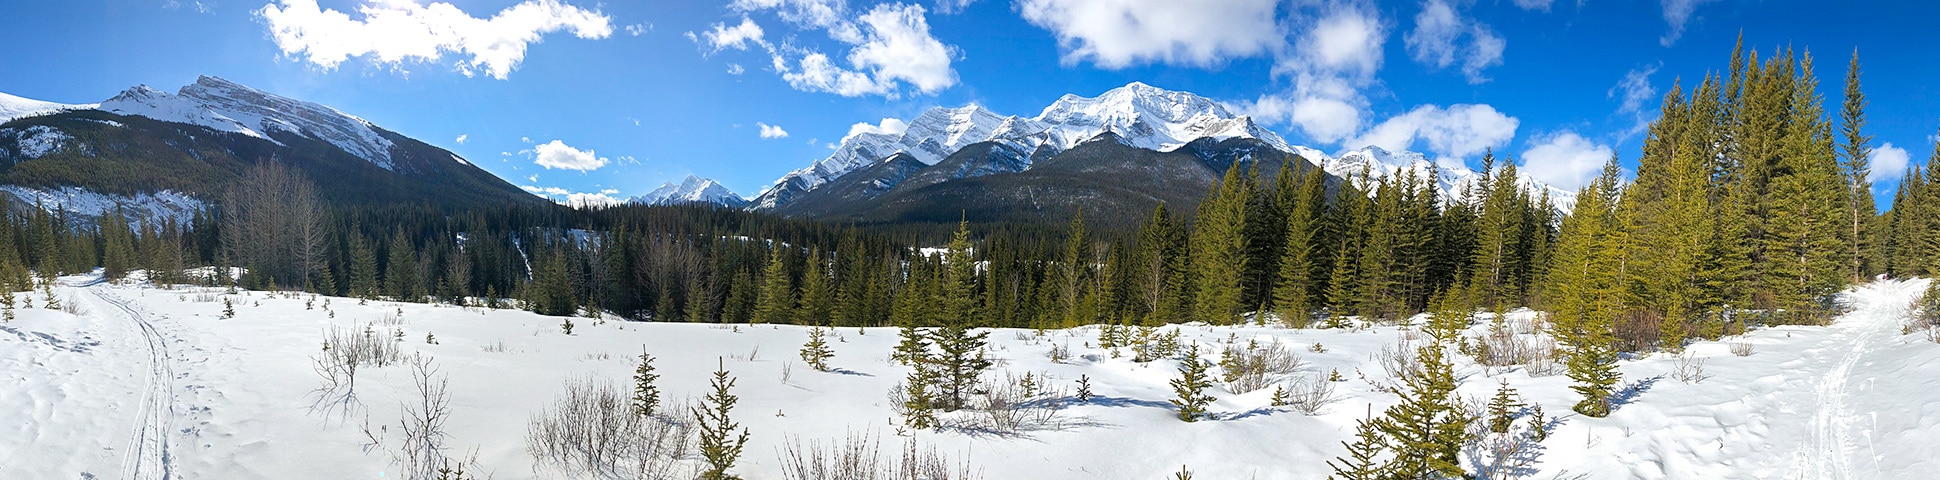 XC skiing trails in Banff National Park, Alberta